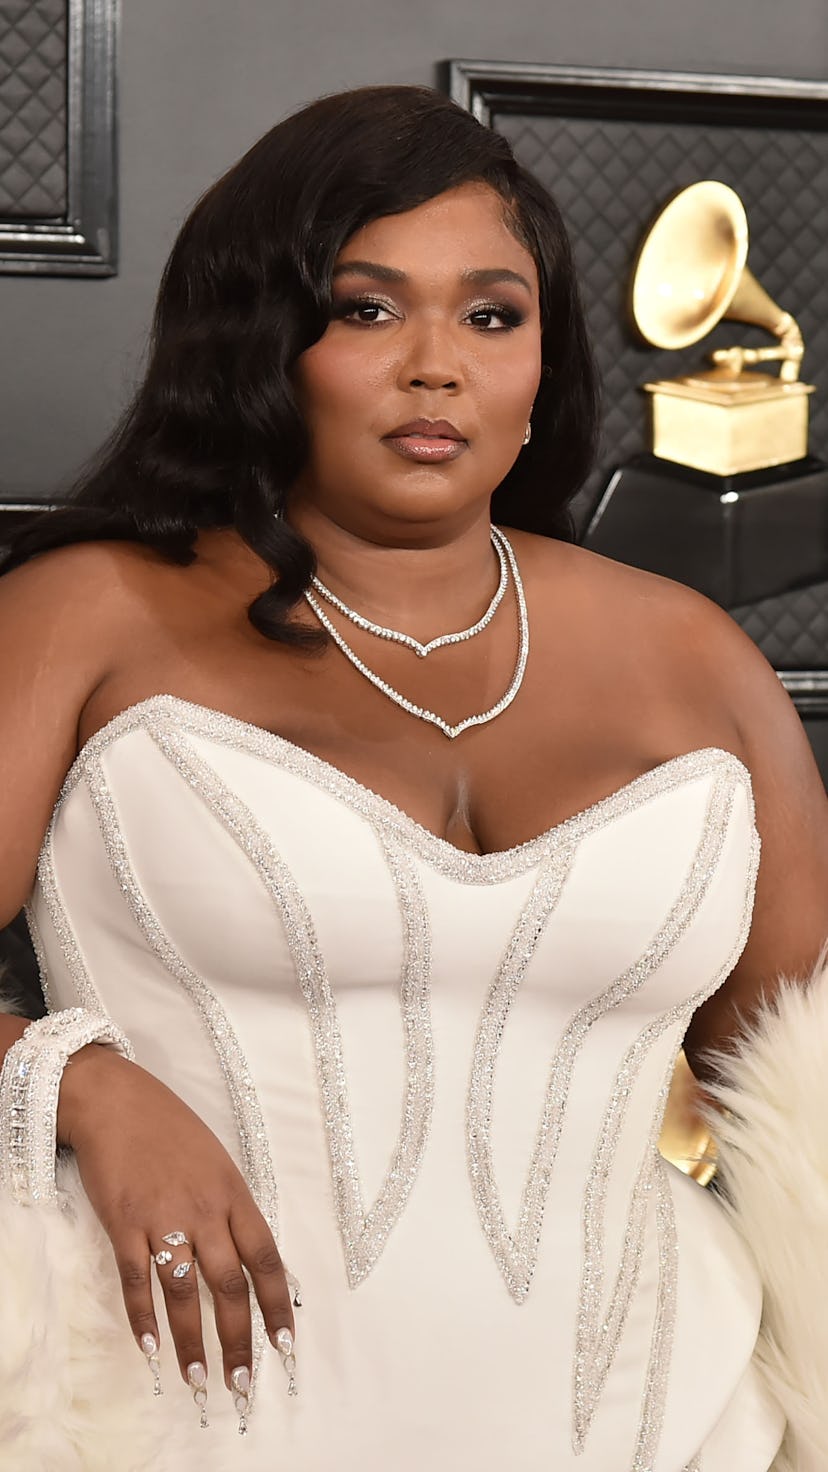 Lizzo at the 2020 Grammys.